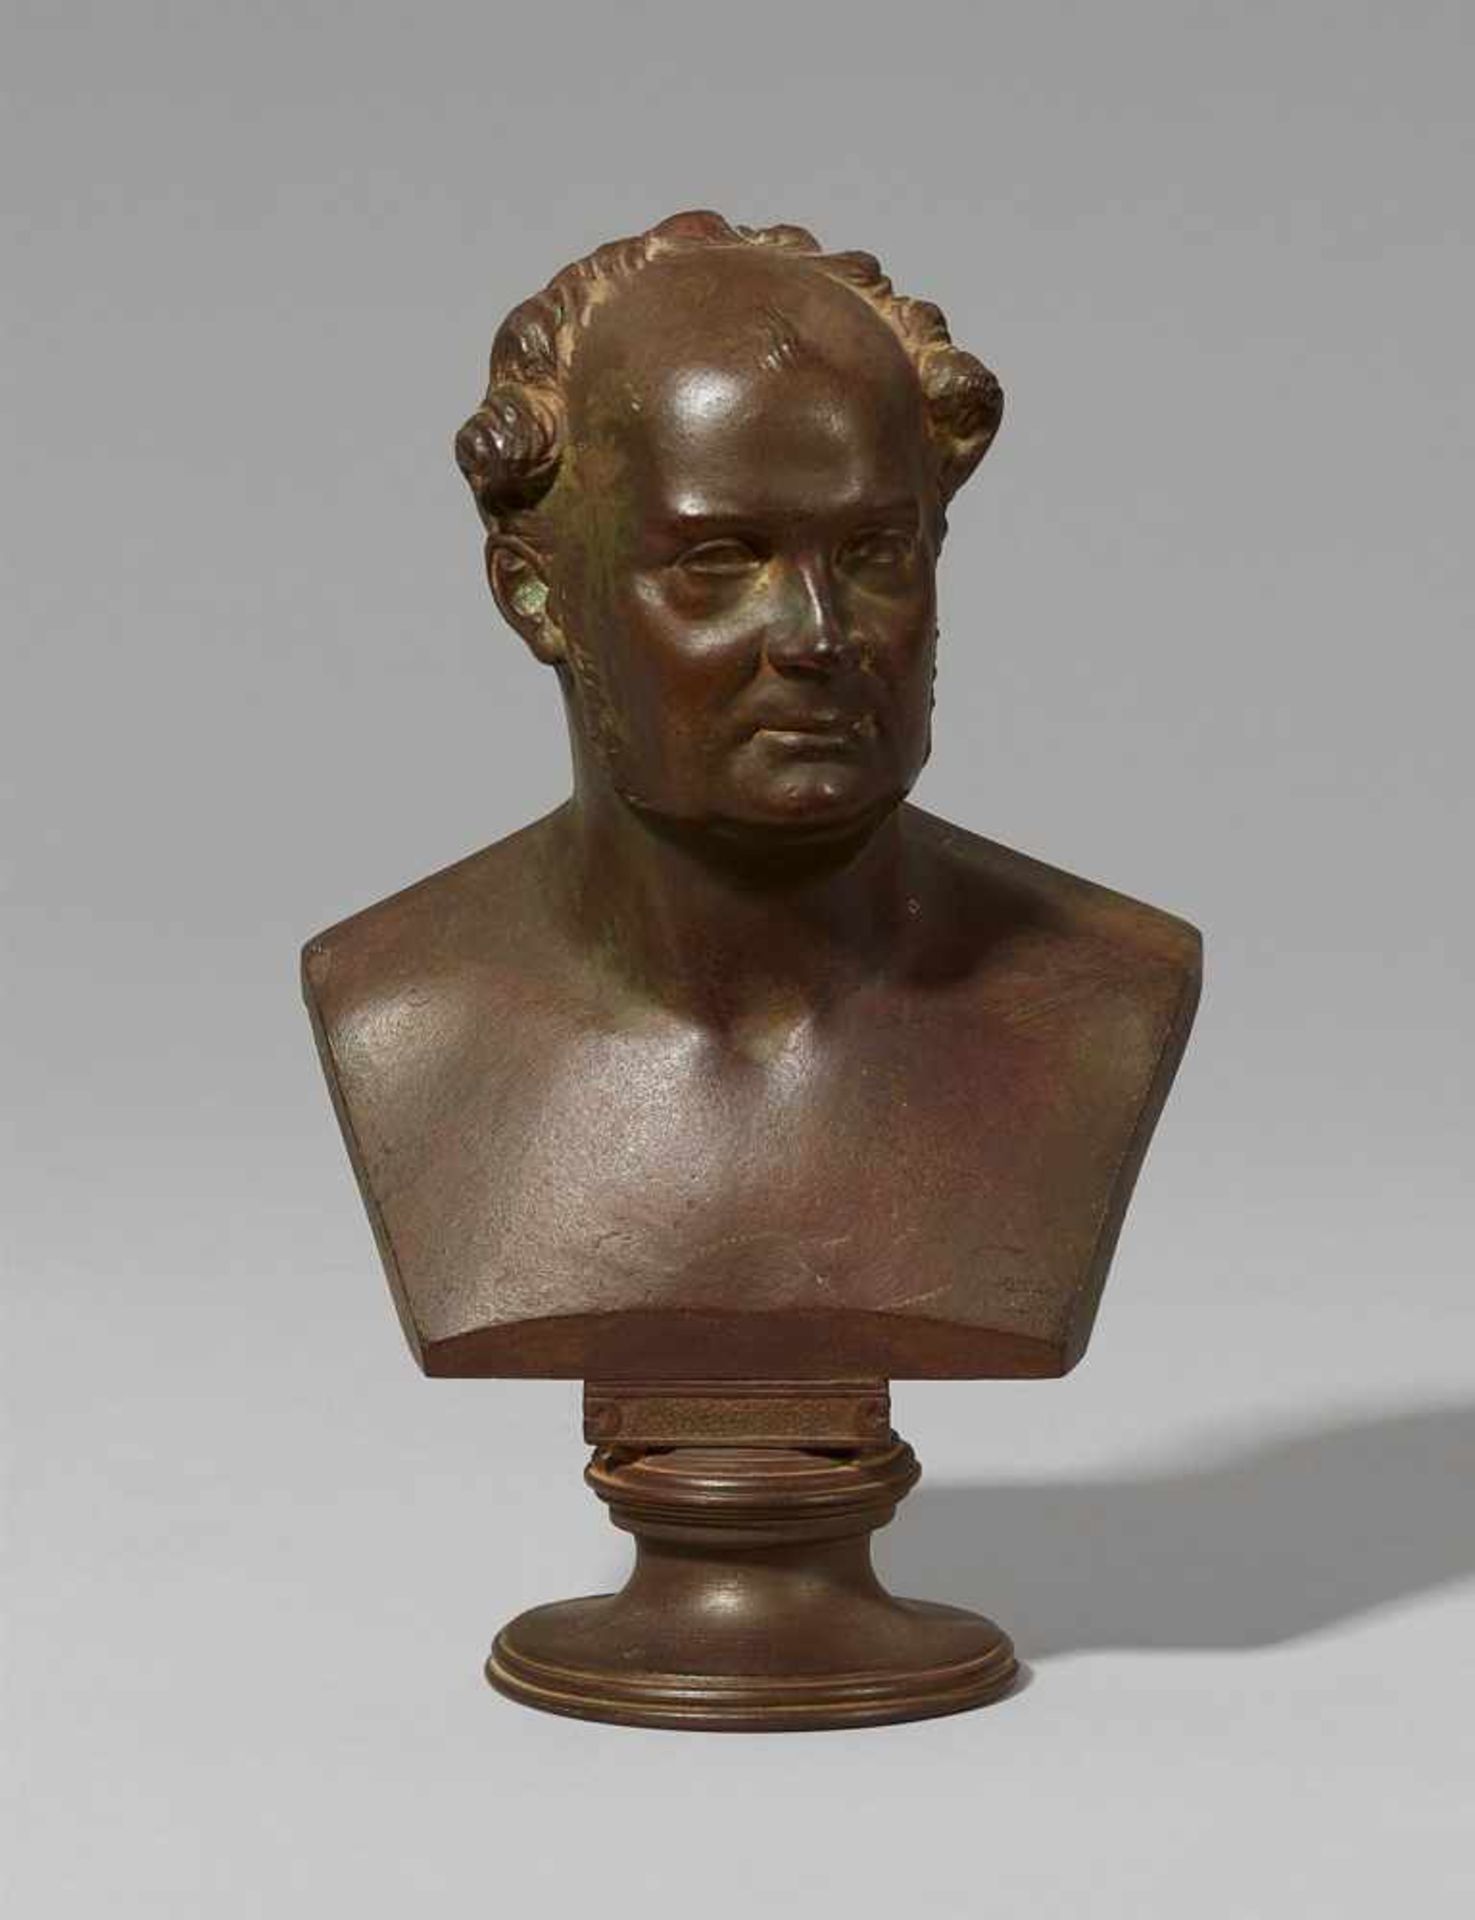 A cast iron bust of Friedrich Wilhelm IVChased bust made from five separately cast pieces. H 19.5